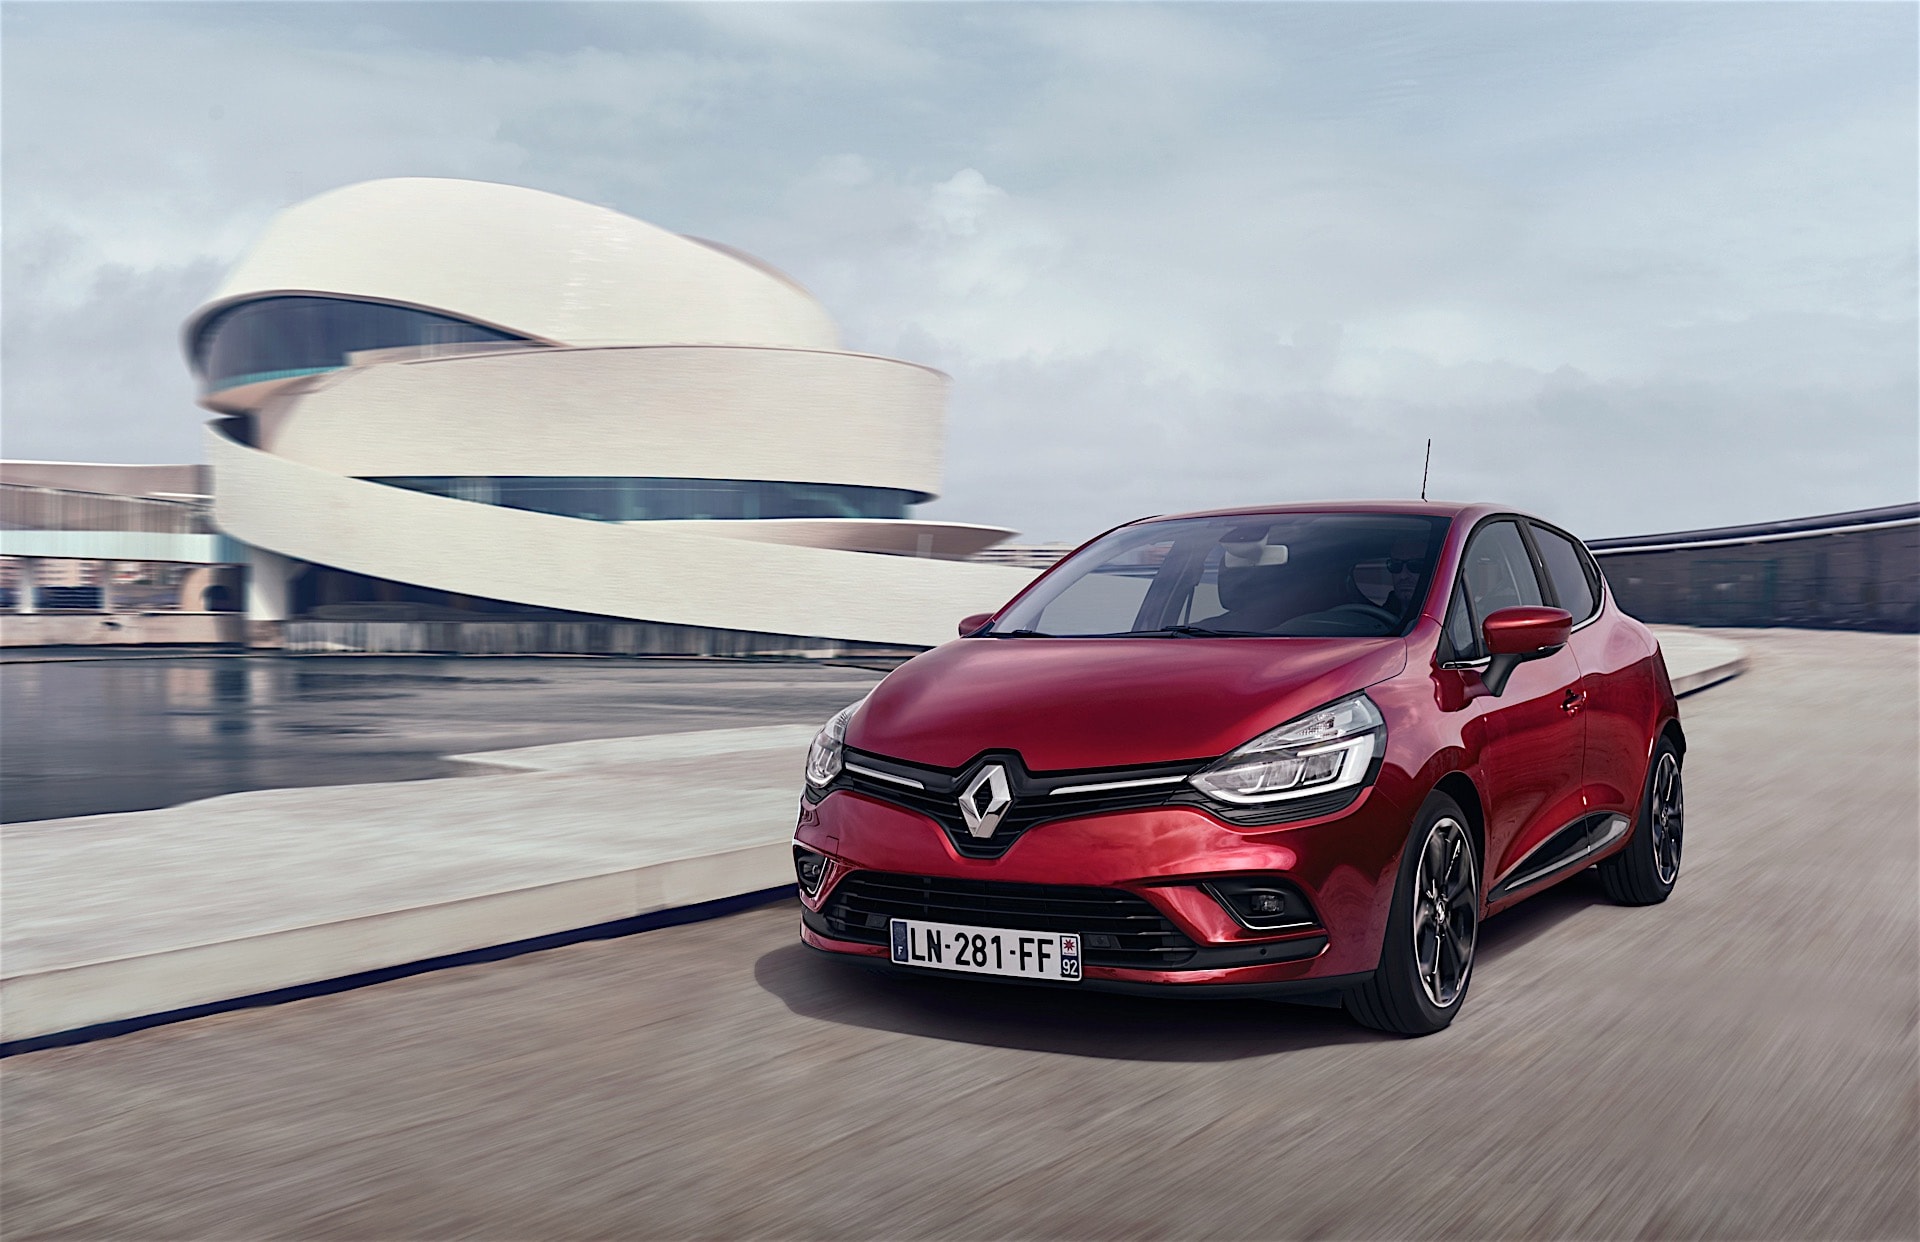 2017 Renault Clio Facelift Revealed, Be Launched At Paris Motor Show autoevolution